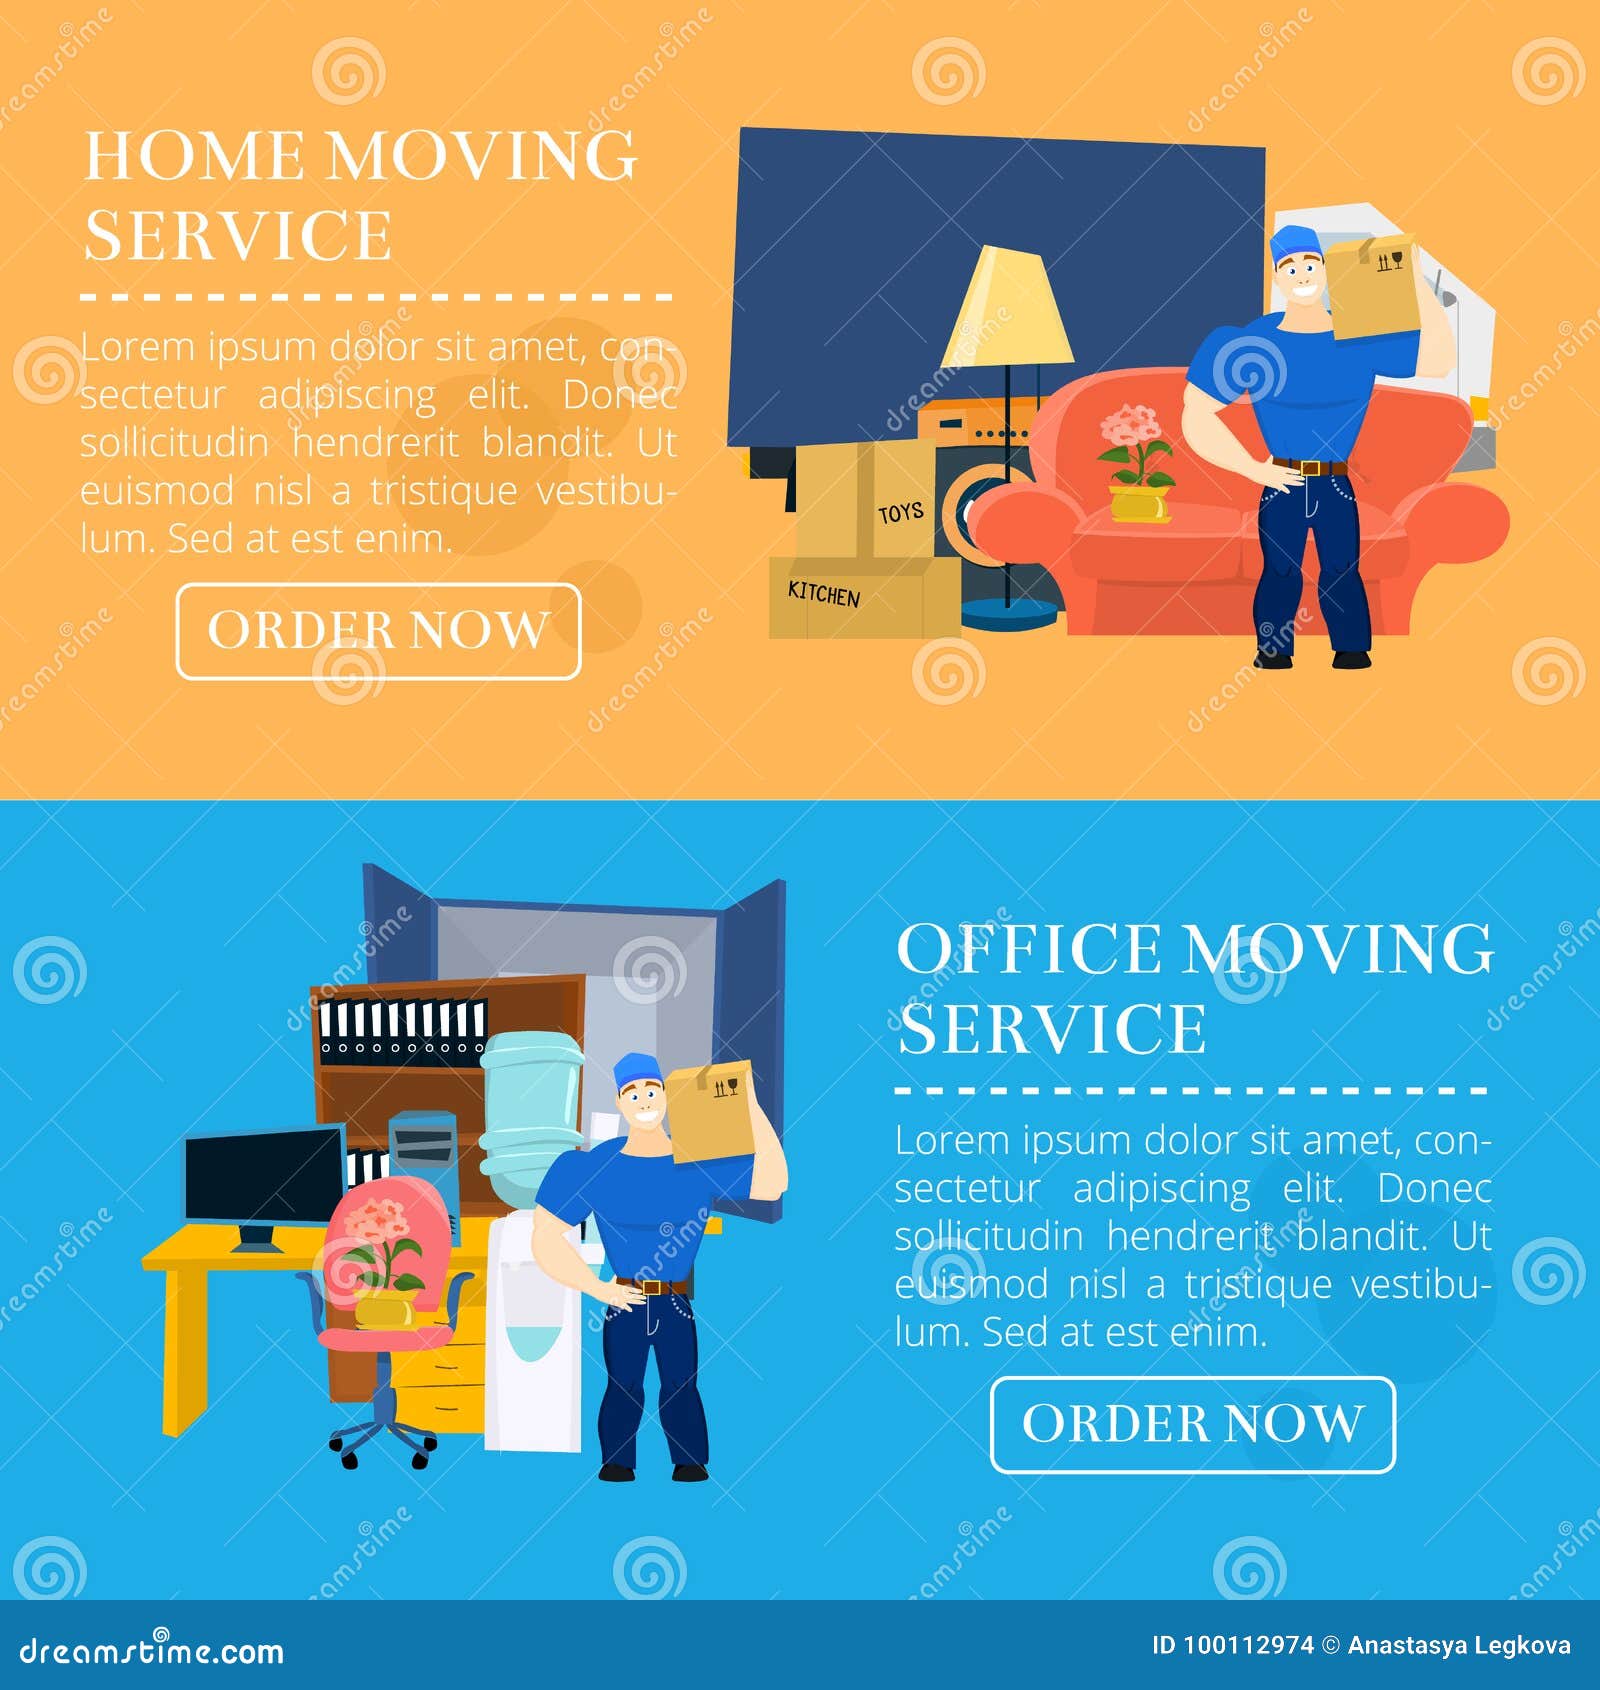 Furniture Movers Stock Illustrations – 368 Furniture Movers Stock  Illustrations, Vectors & Clipart - Dreamstime